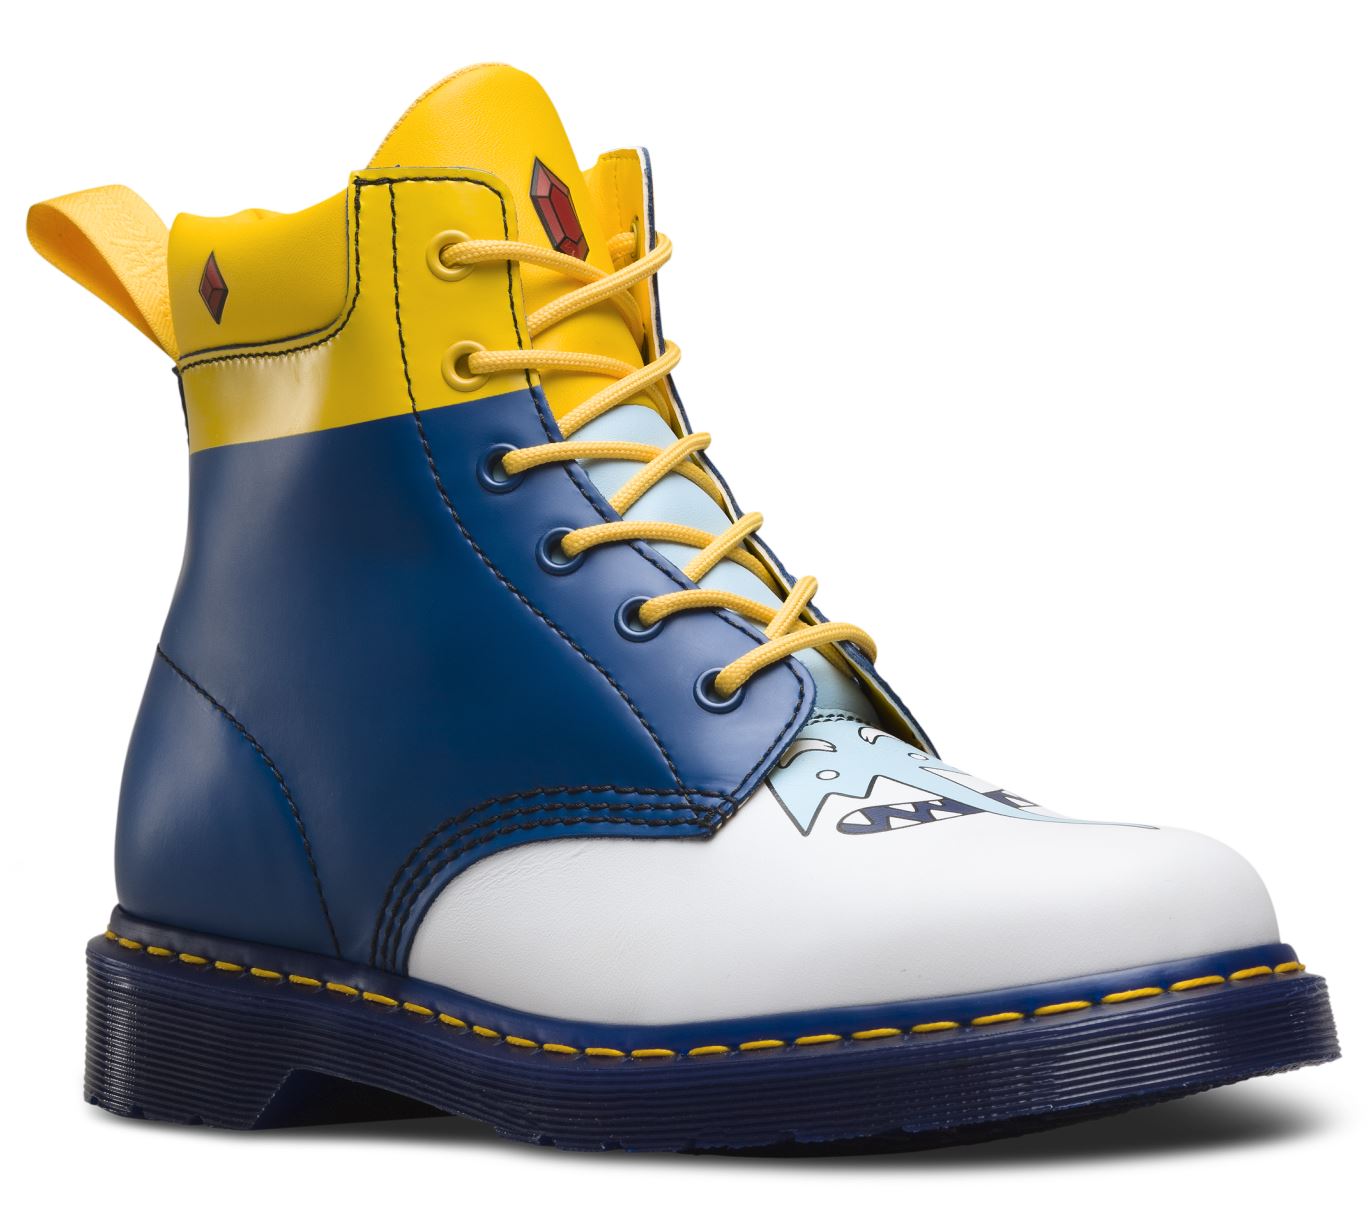 939 ICE KING ADVENTURE TIME BOOT